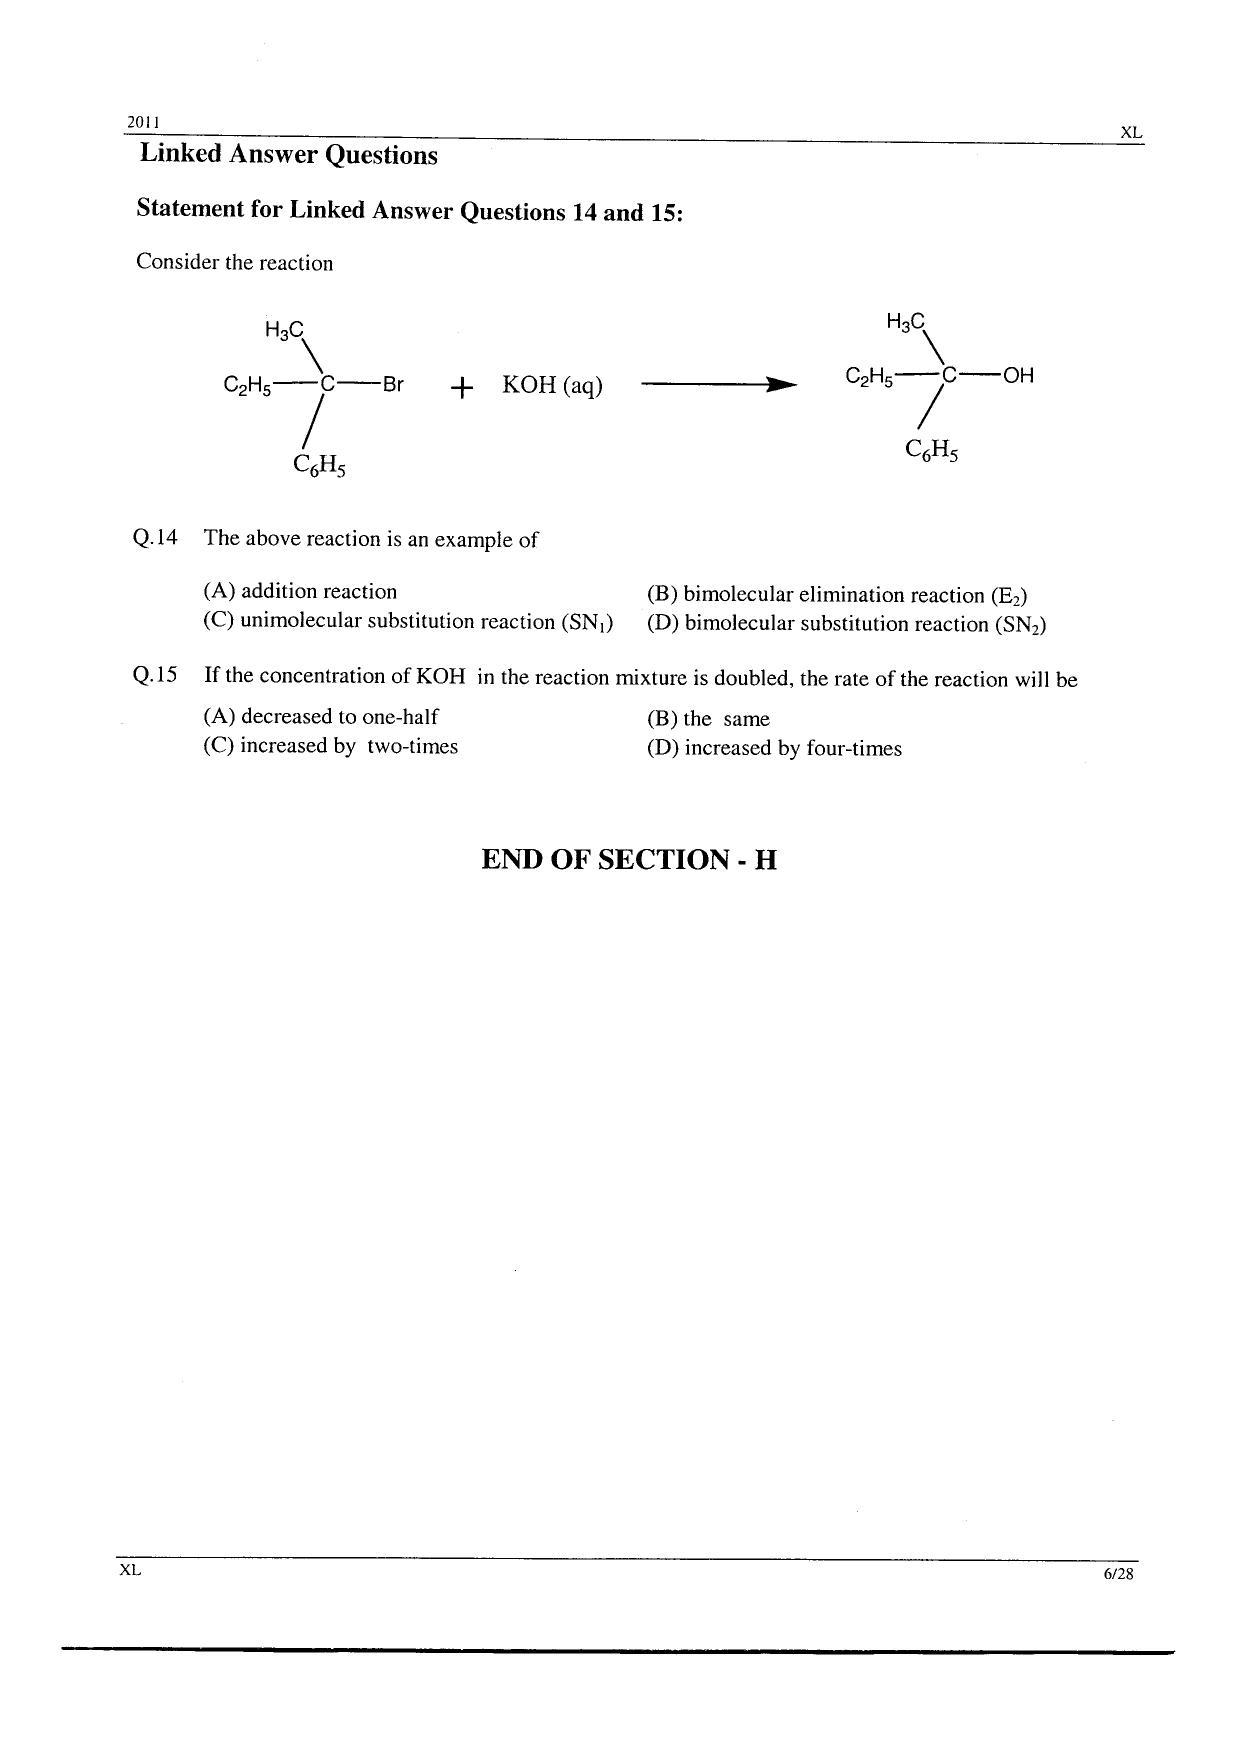 GATE 2011 Life Sciences (XL) Question Paper with Answer Key - Page 6